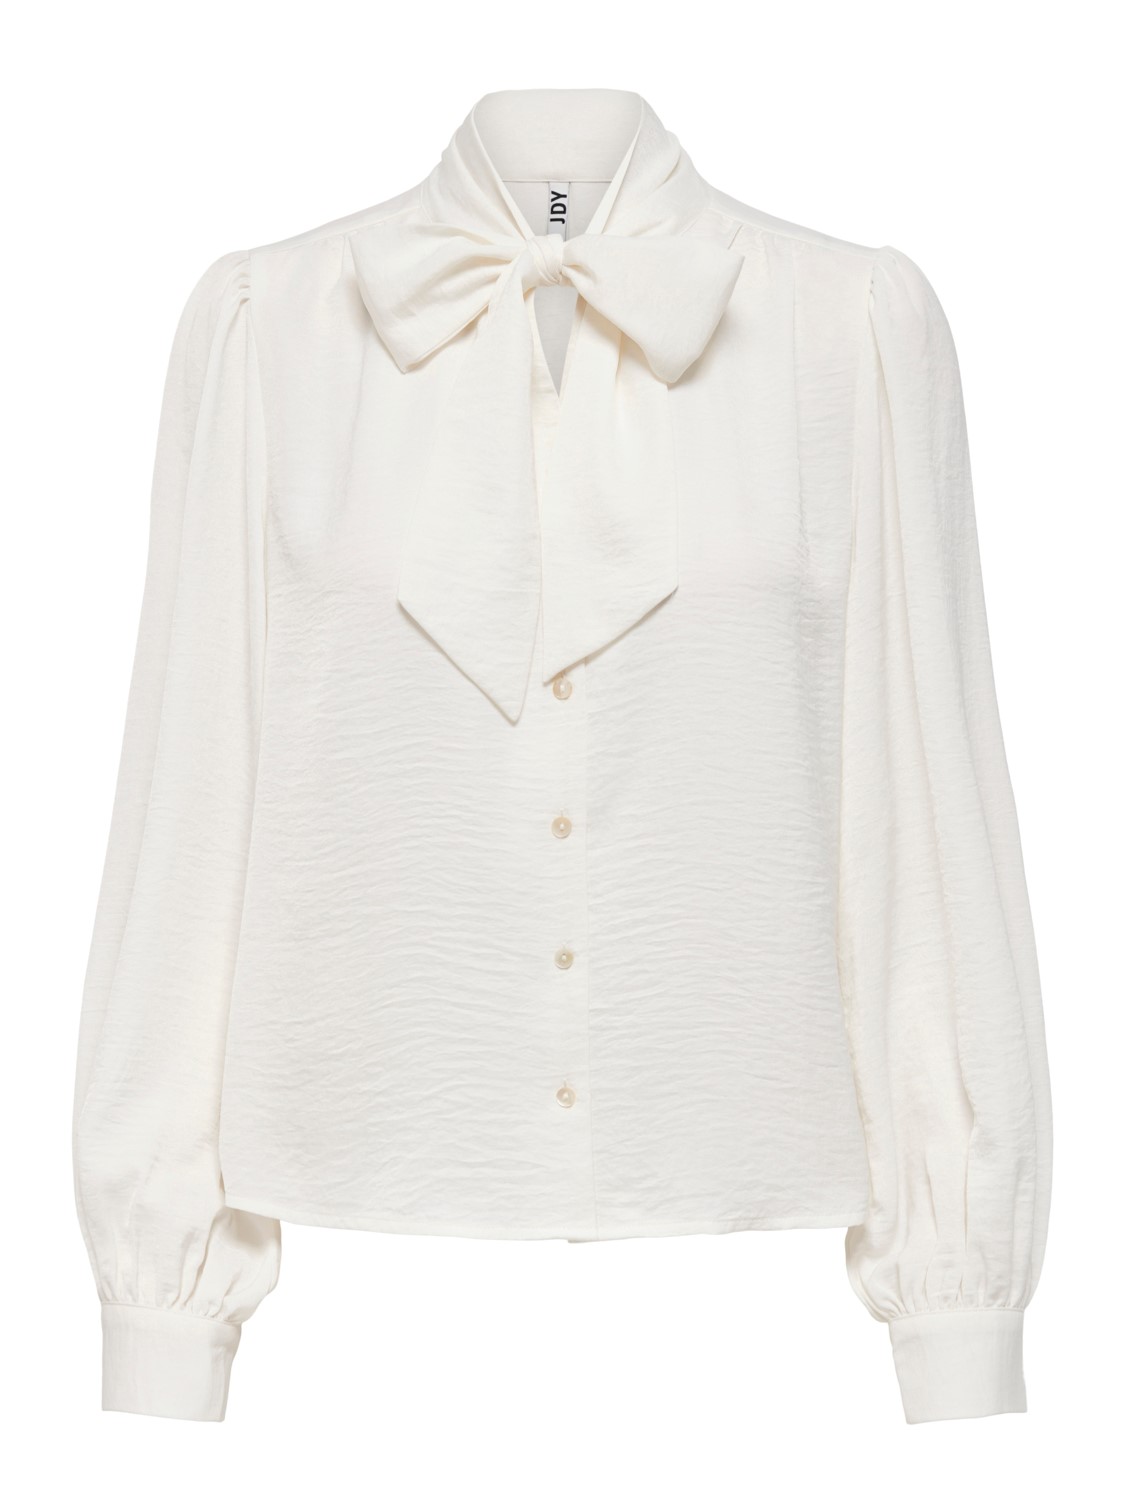 JDY Marni L/S Bow Top, offwhite bluse